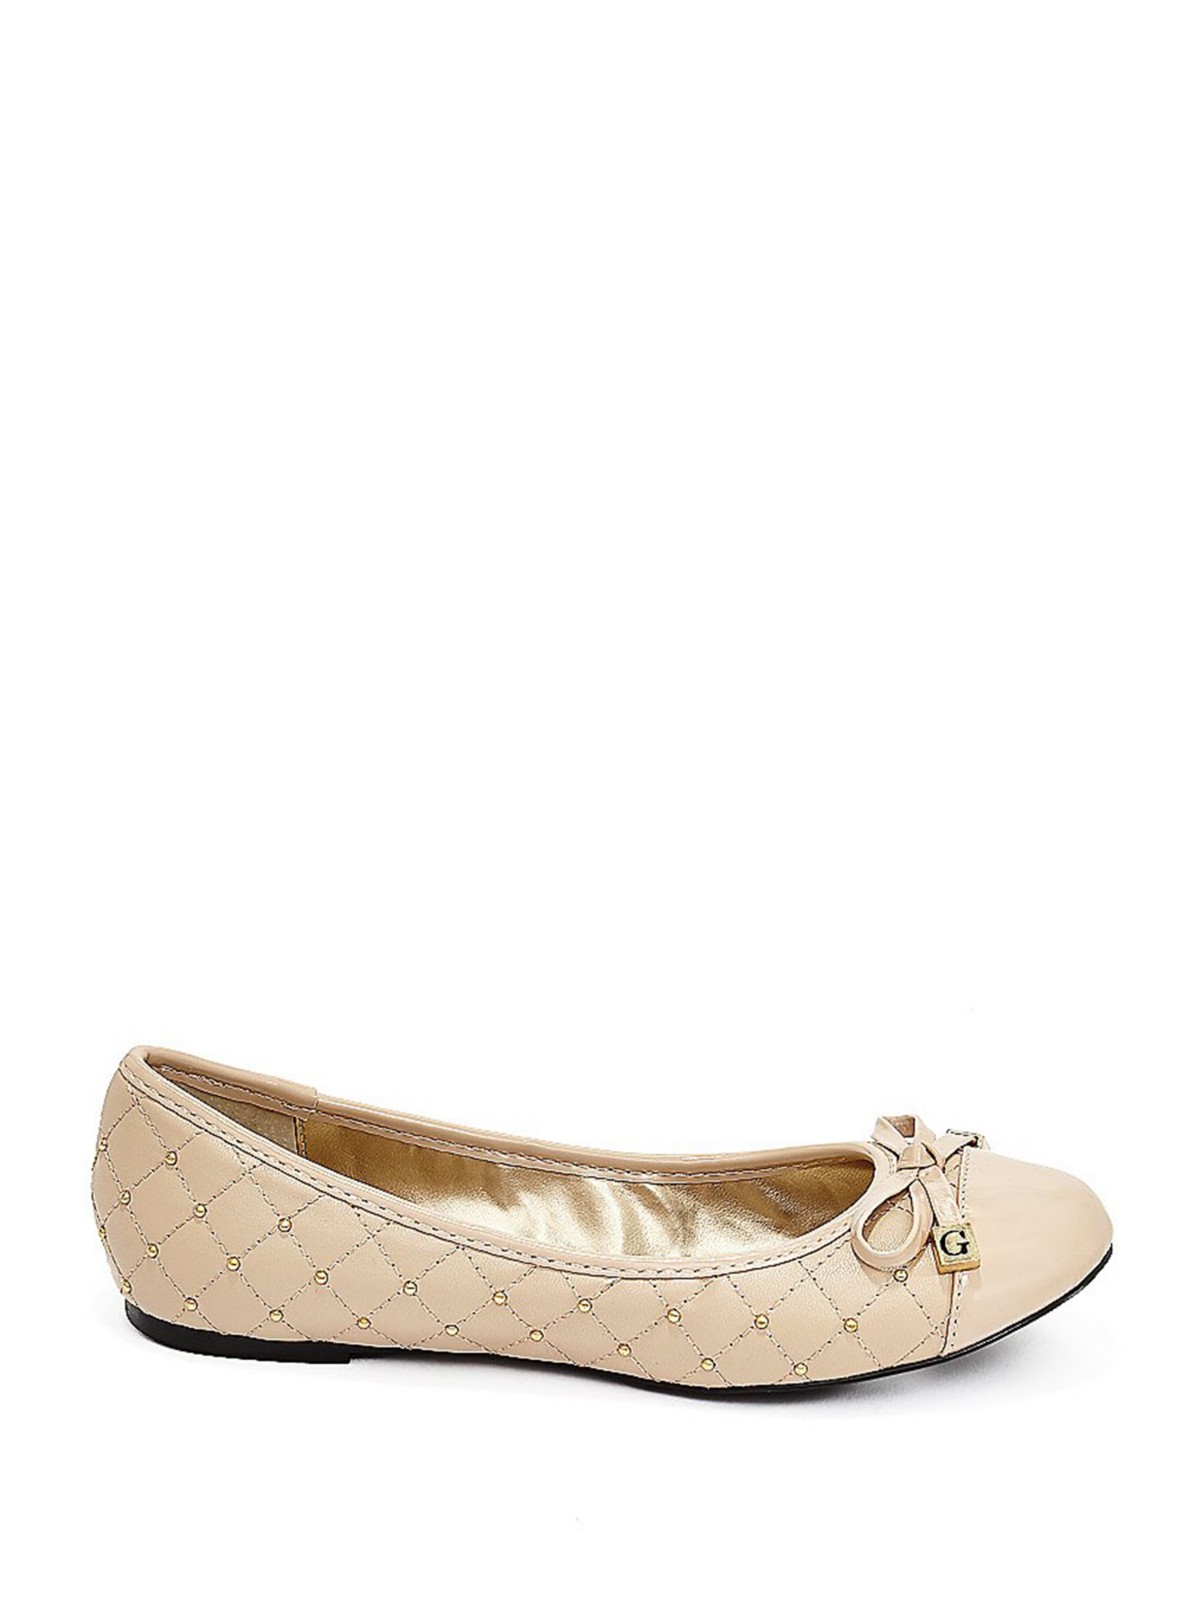 GUESS Georgia Quilted Ballet Flats